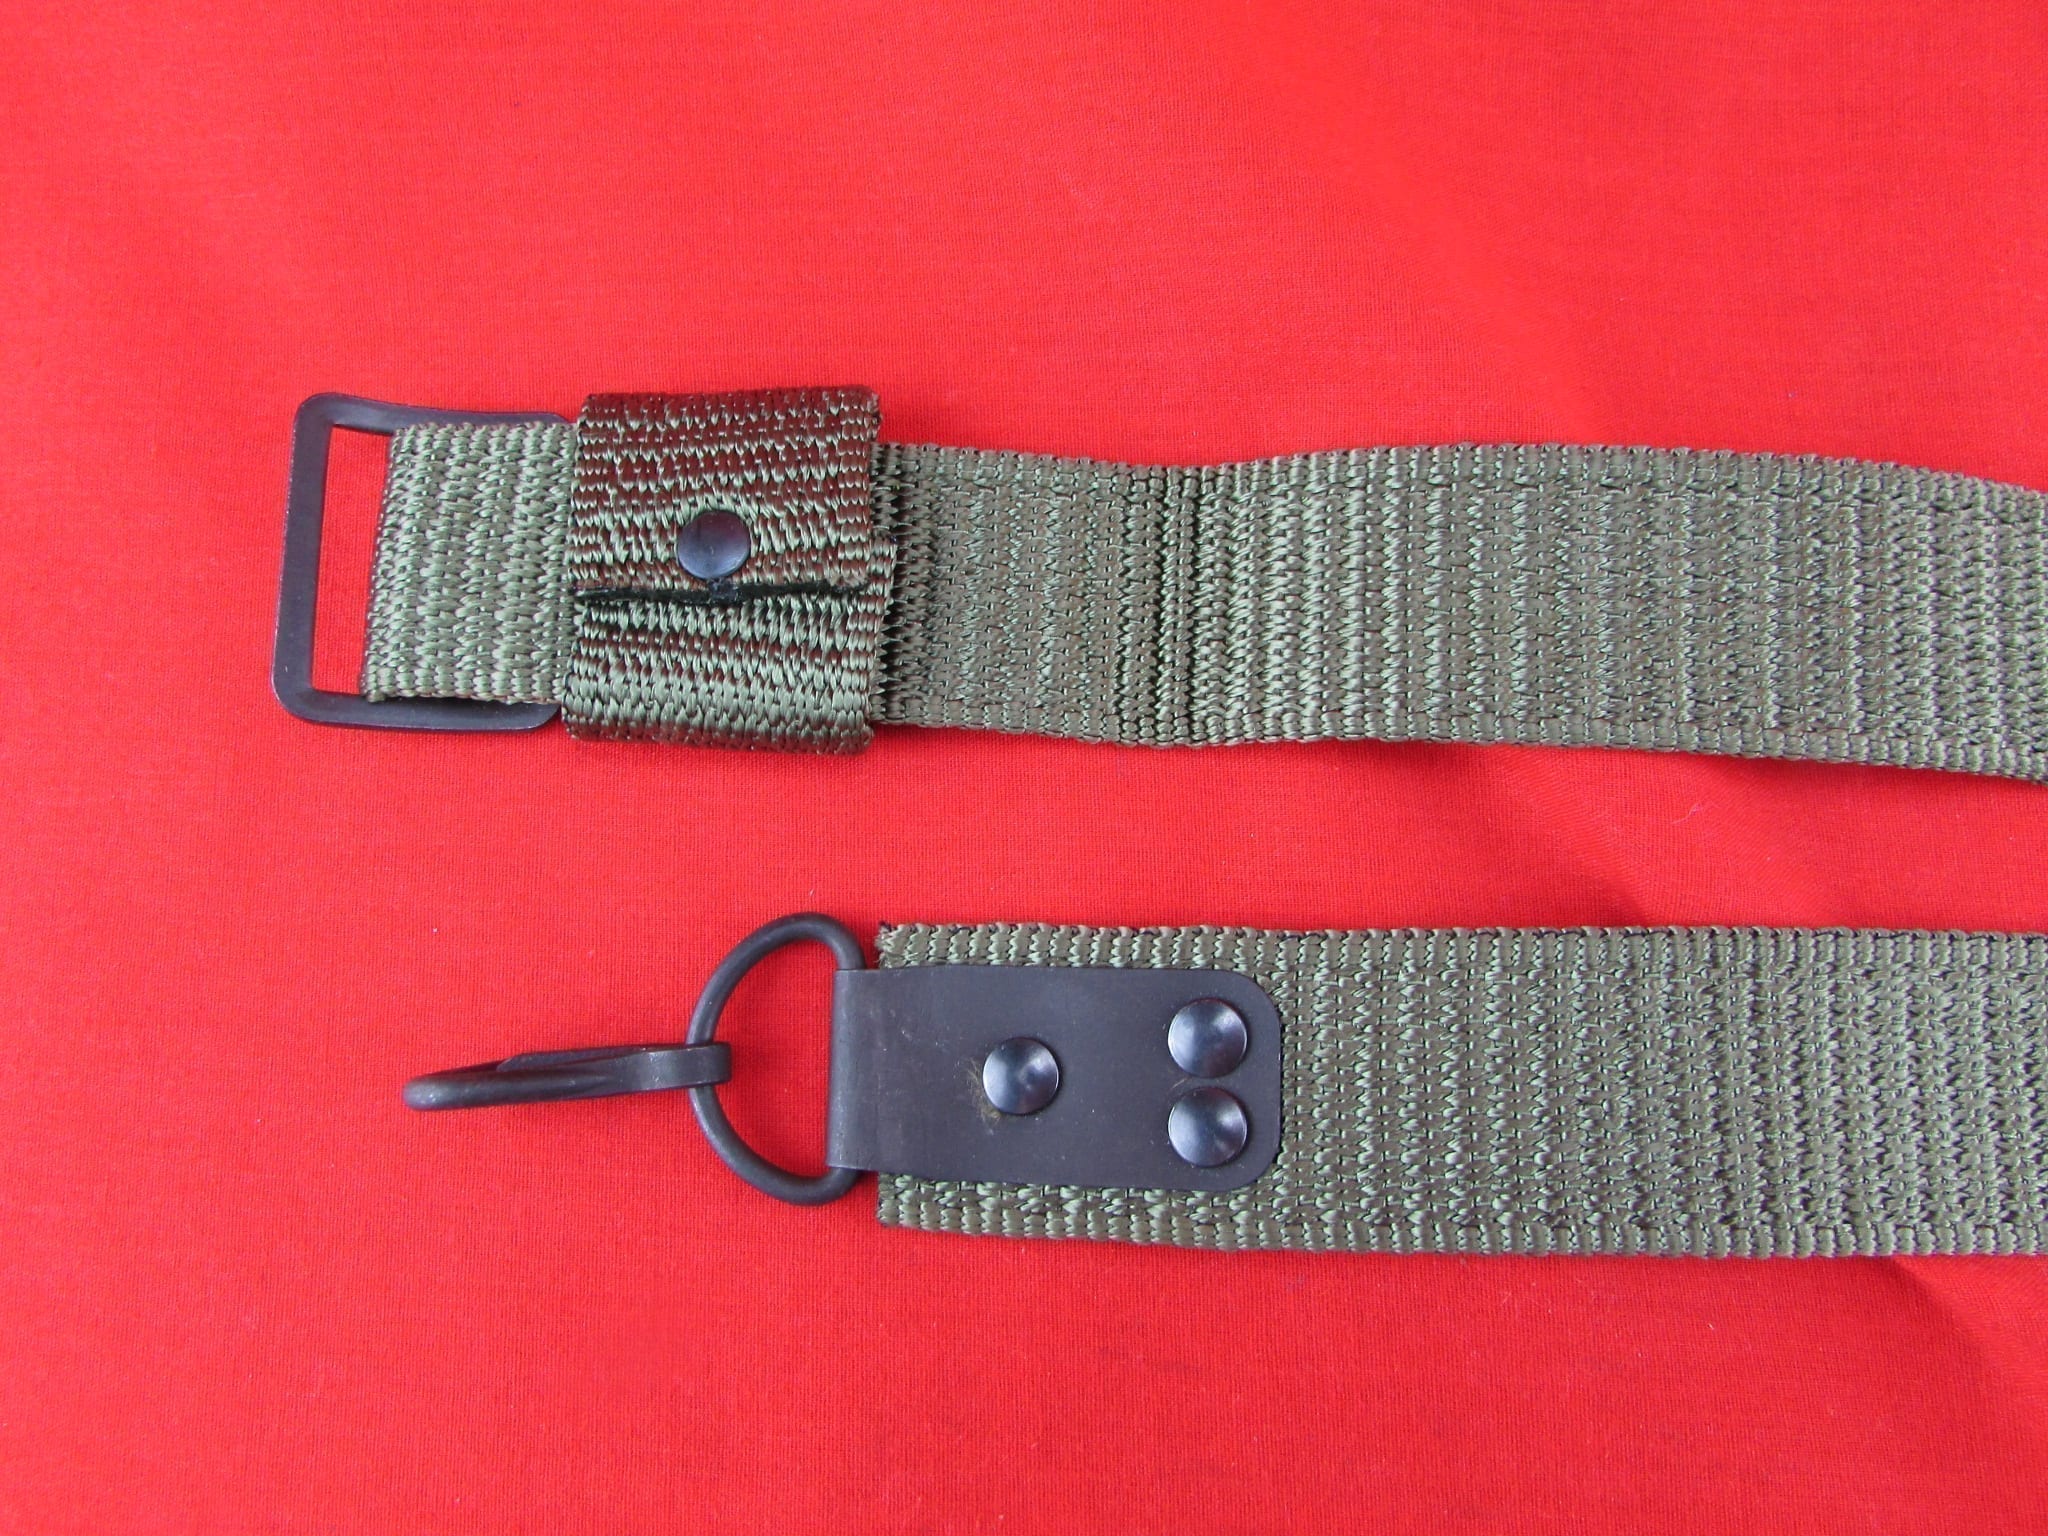 AK47 nylon sling | Midwest Military Collectibles